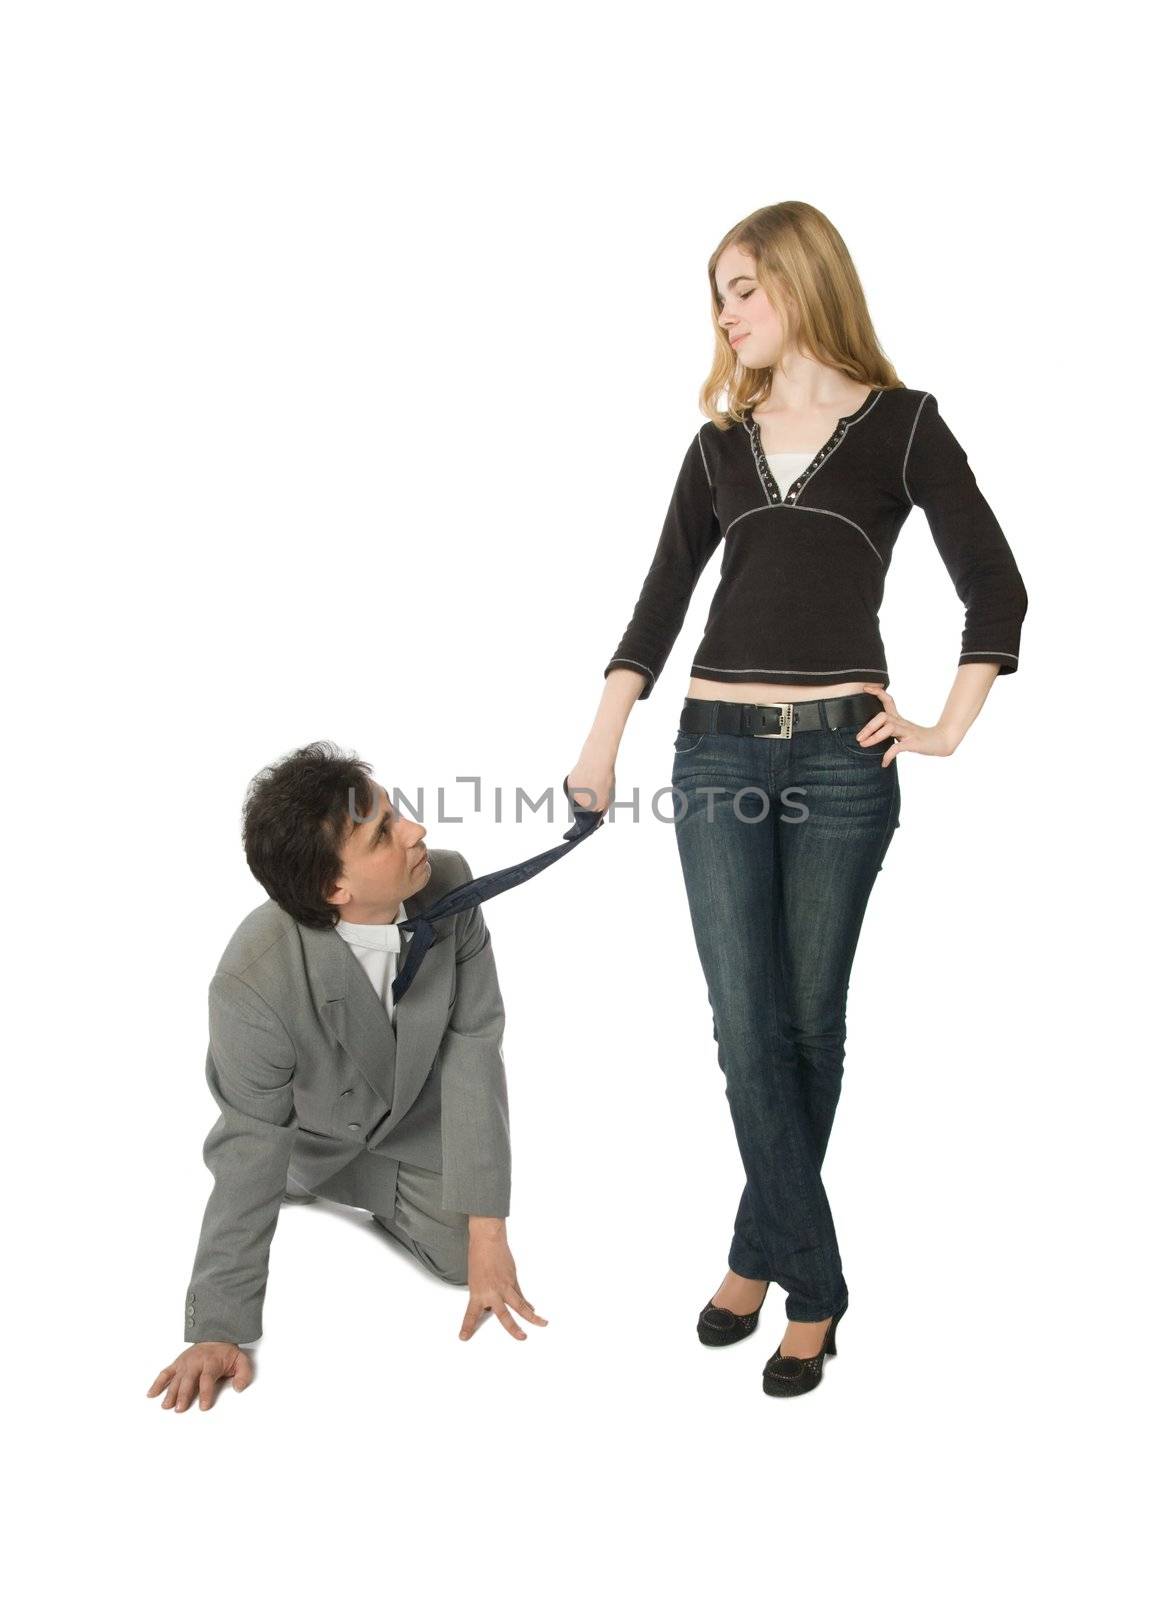 A man on all fours and a young woman pulling him by a necktie